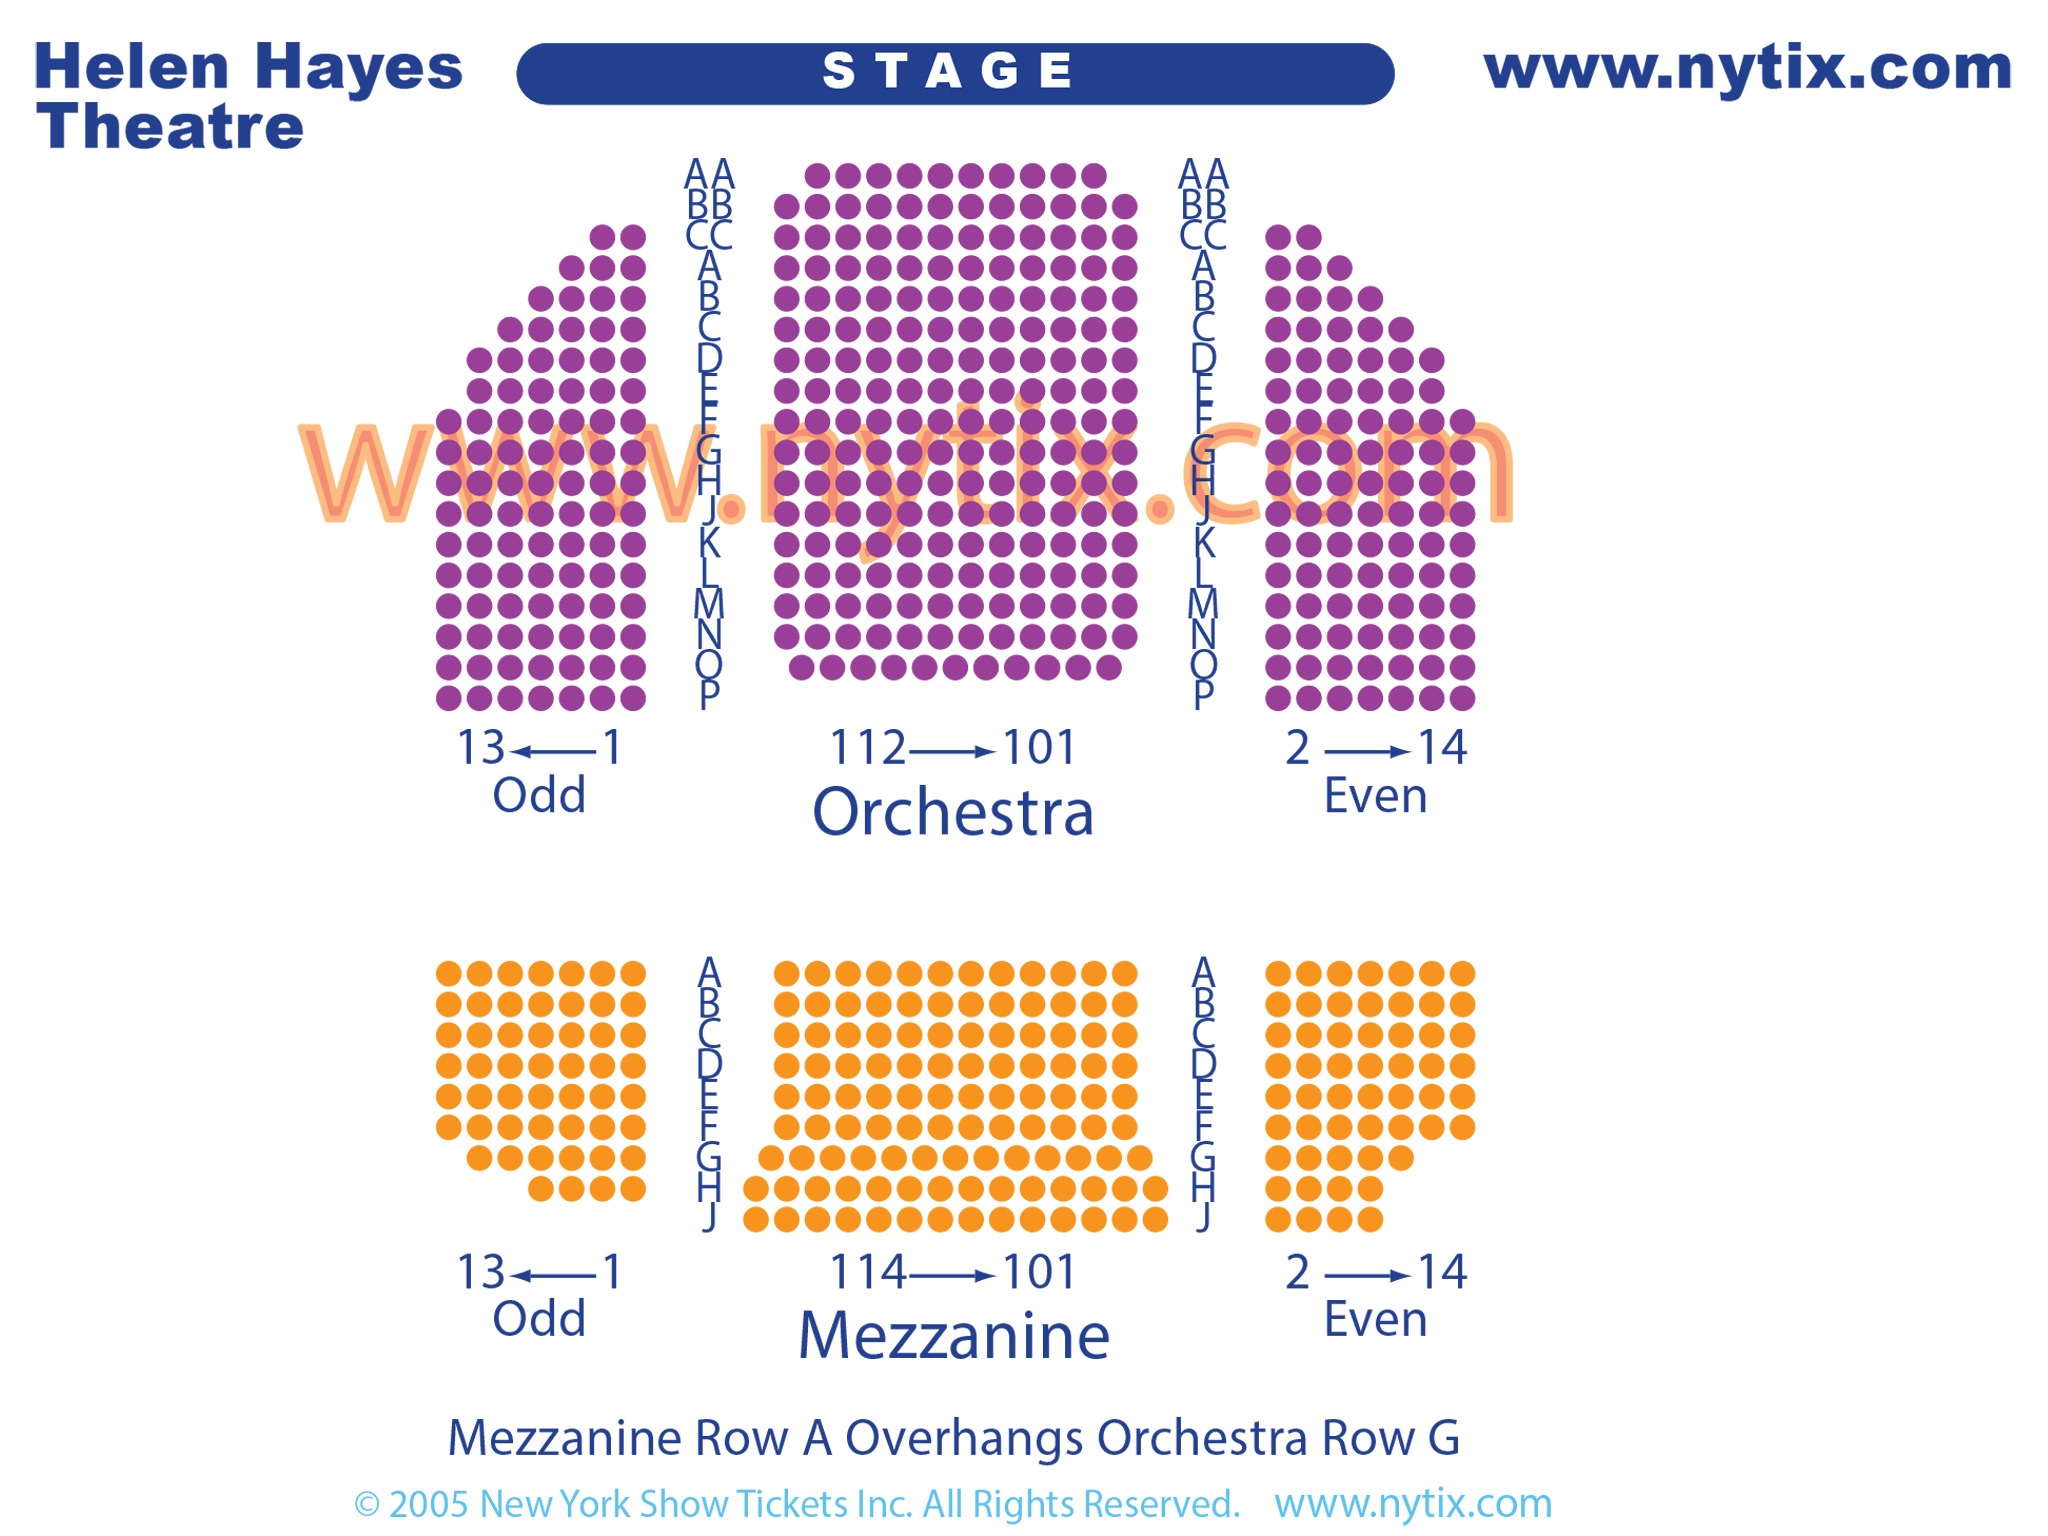 Helen Hayes Broadway Seating Chart